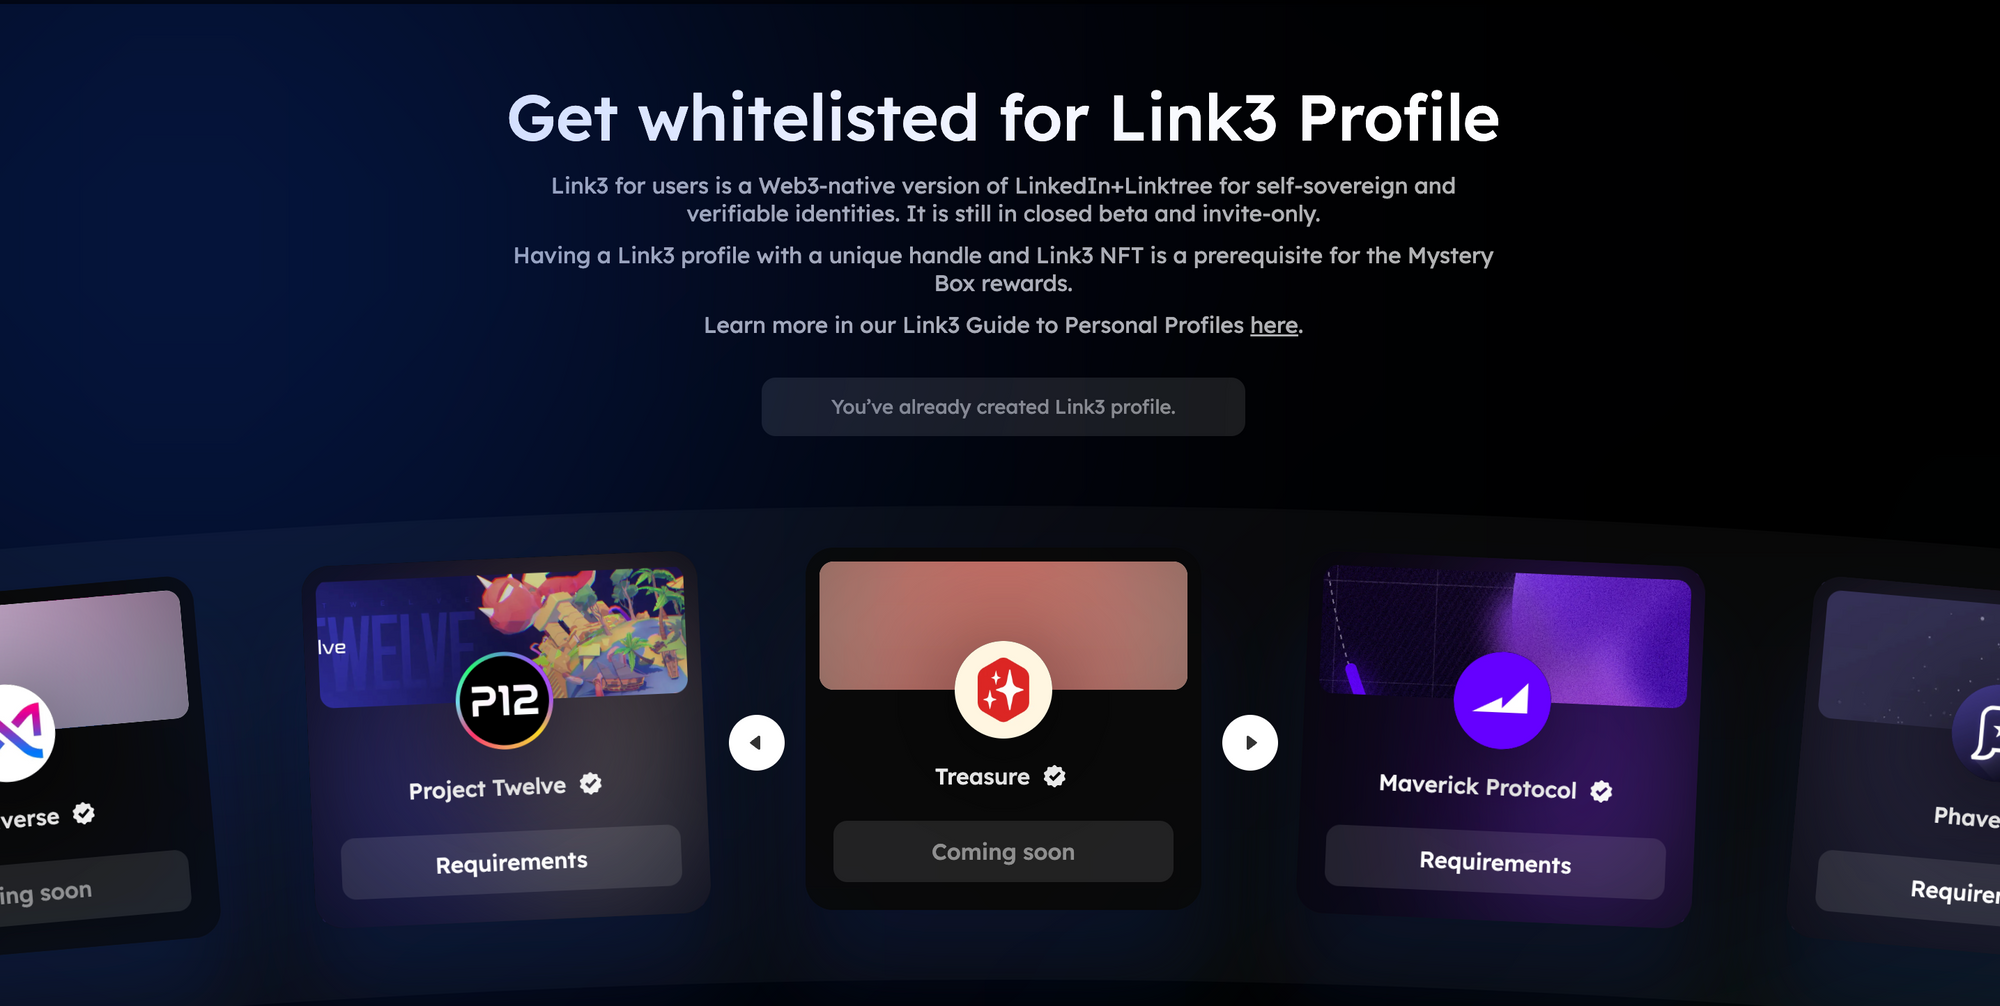 Link3 Personal Profile access whitelisting campaigns